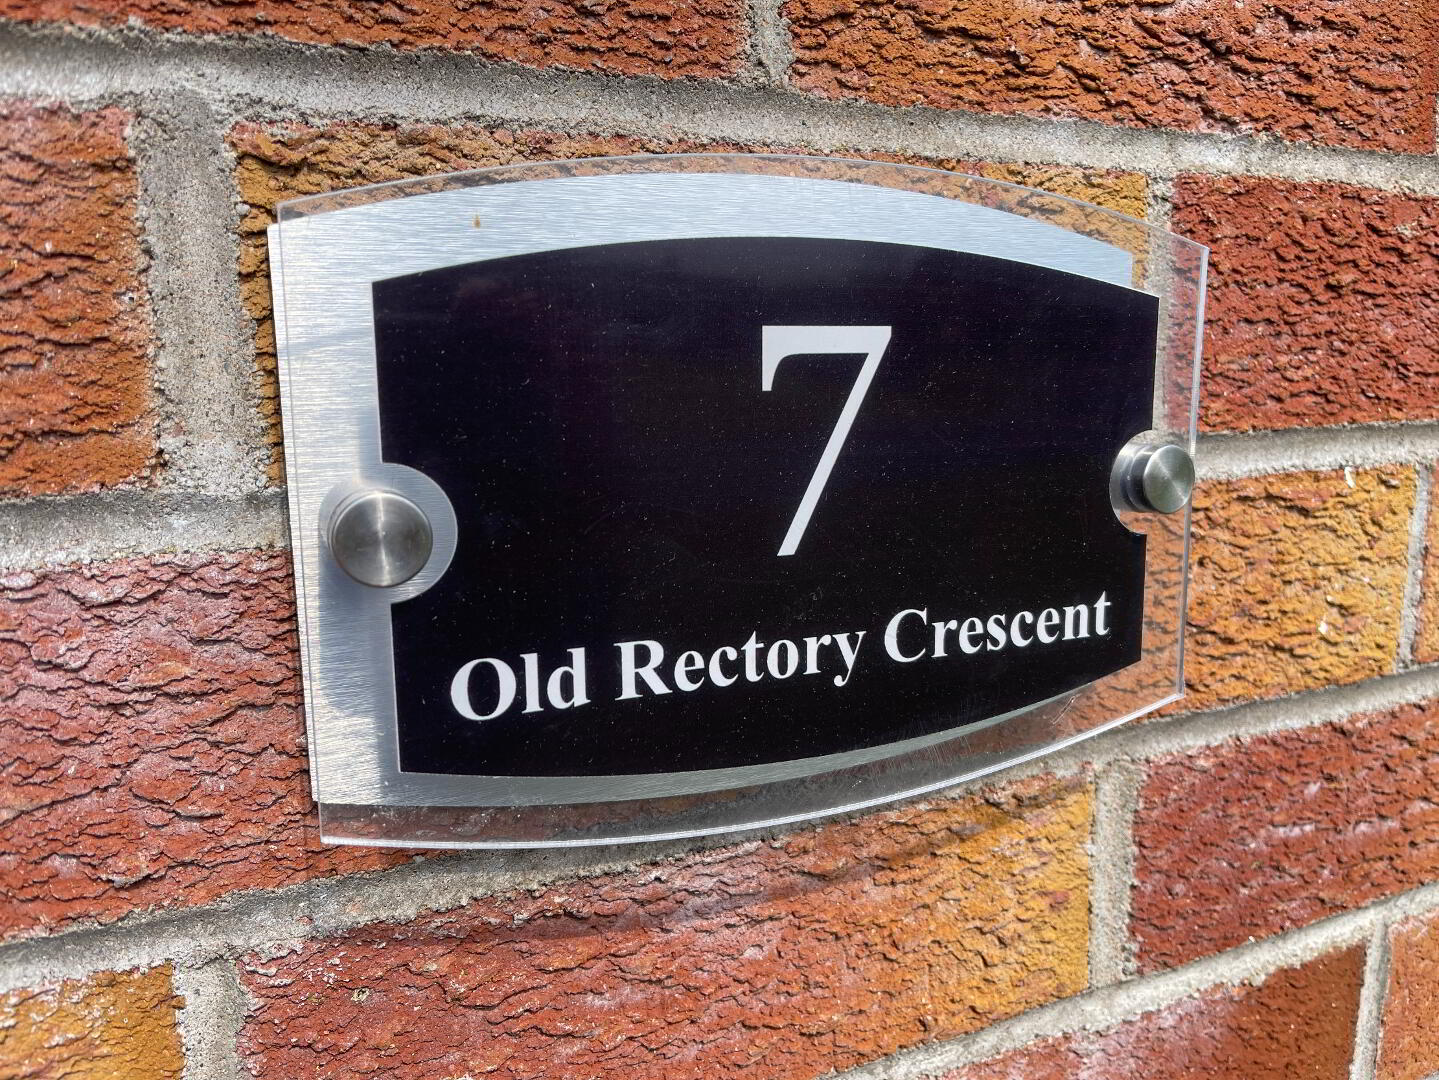 7 Old Rectory Crescent